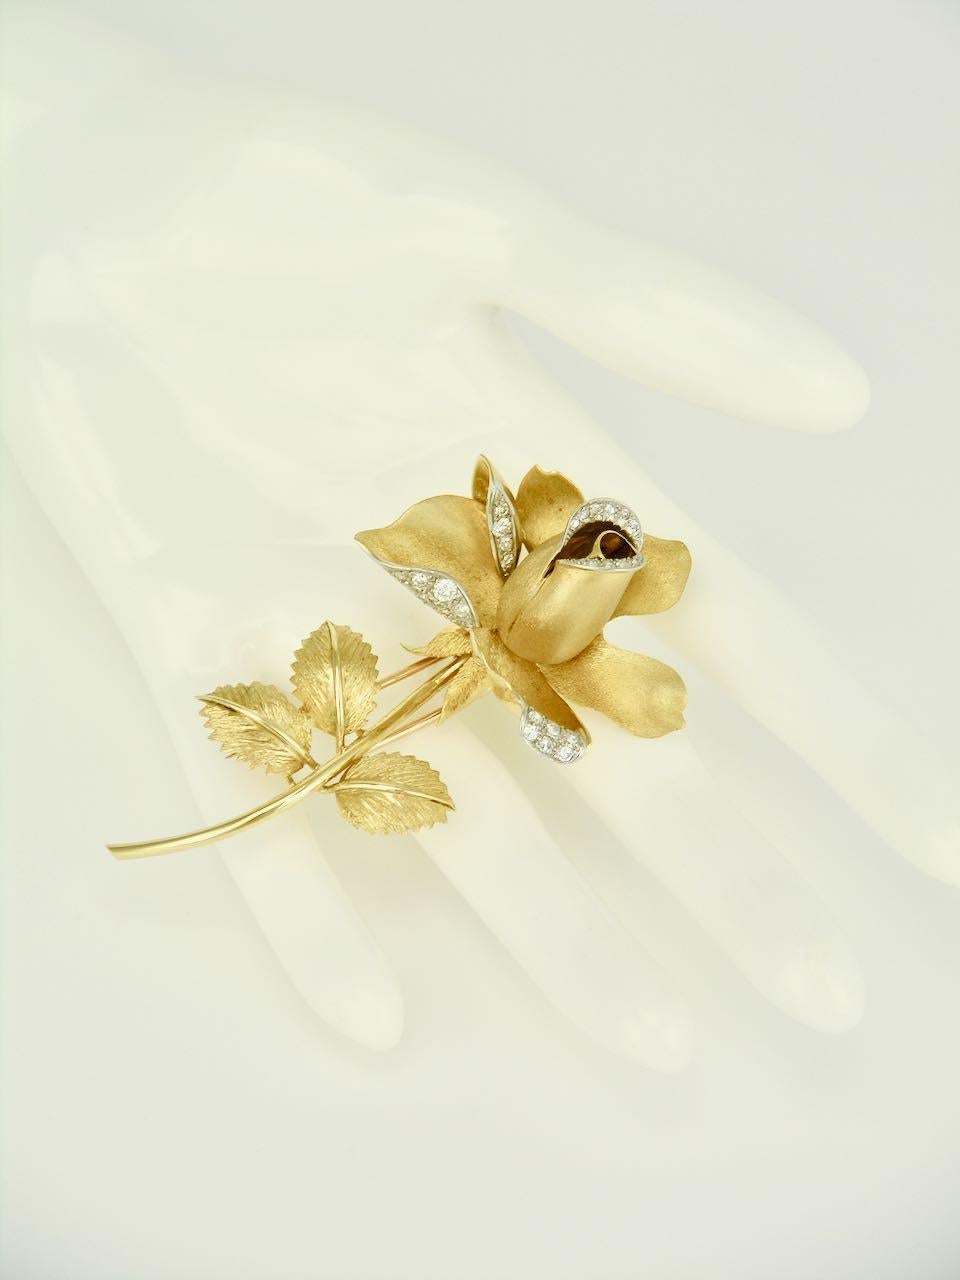 Romantic Vintage 18 Karat Gold and Diamond Rose Flower Brooch Pin, 1960s For Sale